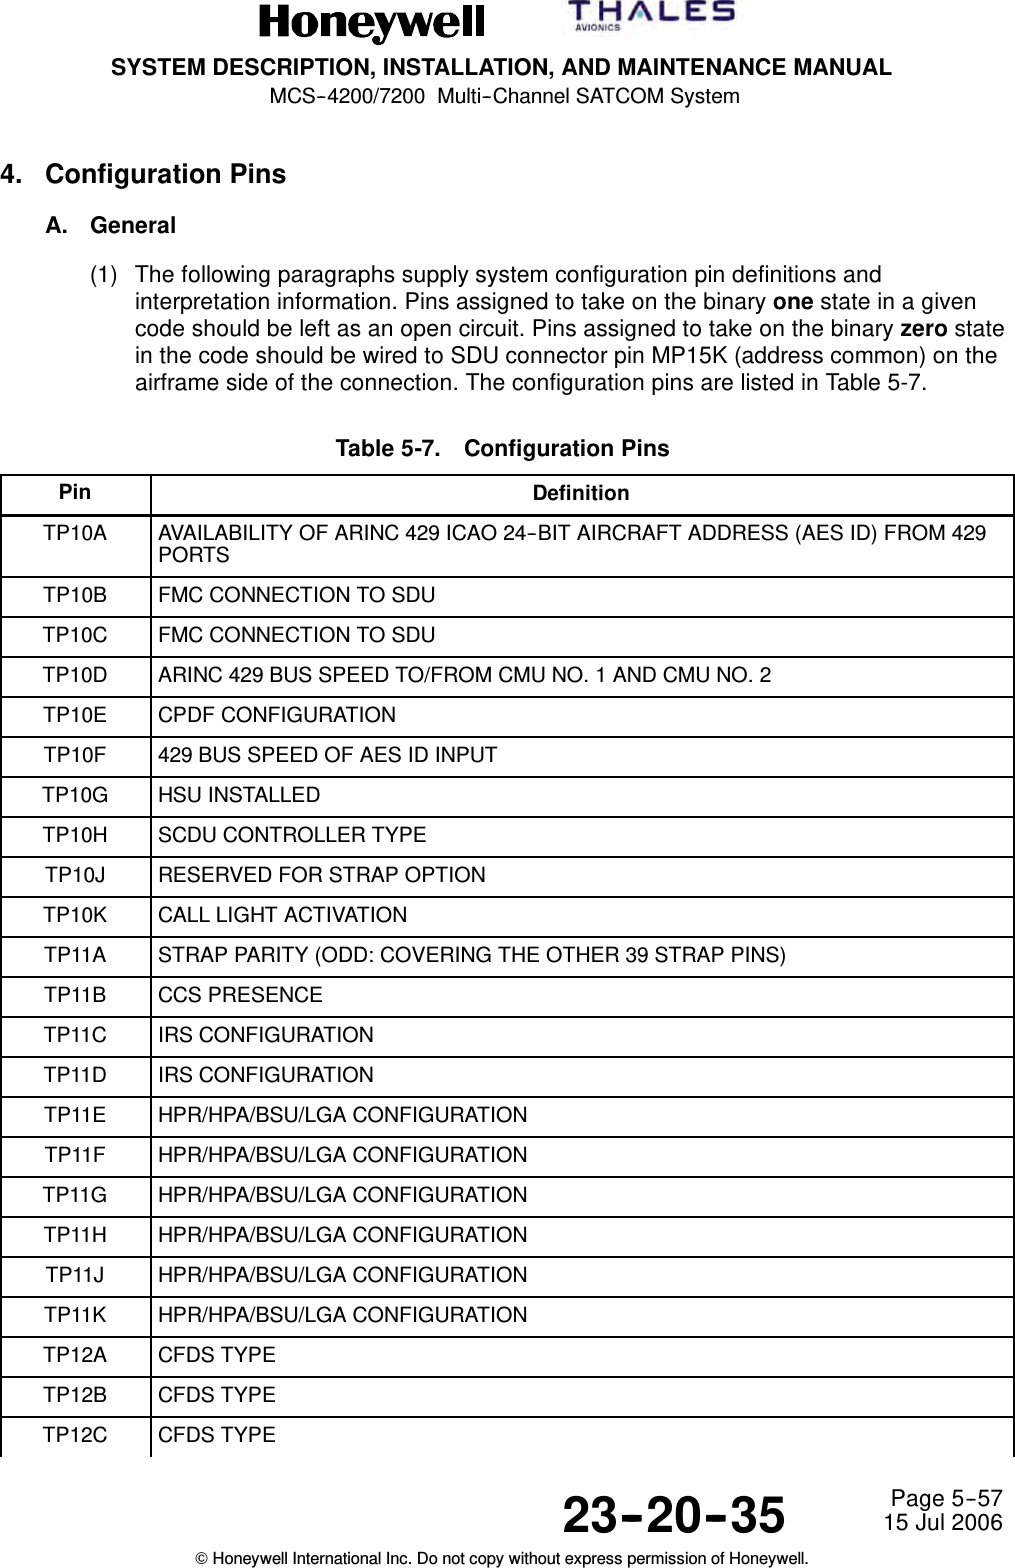 SYSTEM DESCRIPTION, INSTALLATION, AND MAINTENANCE MANUALMCS--4200/7200 Multi--Channel SATCOM System23--20--35 15 Jul 2006Honeywell International Inc. Do not copy without express permission of Honeywell.Page 5--574. Configuration PinsA. General(1) The following paragraphs supply system configuration pin definitions andinterpretation information. Pins assigned to take on the binary one stateinagivencode should be left as an open circuit. Pins assigned to take on the binary zero statein the code should be wired to SDU connector pin MP15K (address common) on theairframe side of the connection. The configuration pins are listed in Table 5-7.Table 5-7. Configuration PinsPin DefinitionTP10A AVAILABILITY OF ARINC 429 ICAO 24--BIT AIRCRAFT ADDRESS (AES ID) FROM 429PORTSTP10B FMC CONNECTION TO SDUTP10C FMC CONNECTION TO SDUTP10D ARINC 429 BUS SPEED TO/FROM CMU NO. 1 AND CMU NO. 2TP10E CPDF CONFIGURATIONTP10F 429 BUS SPEED OF AES ID INPUTTP10G HSU INSTALLEDTP10H SCDU CONTROLLER TYPETP10J RESERVED FOR STRAP OPTIONTP10K CALL LIGHT ACTIVATIONTP11A STRAP PARITY (ODD: COVERING THE OTHER 39 STRAP PINS)TP11B CCS PRESENCETP11C IRS CONFIGURATIONTP11D IRS CONFIGURATIONTP11E HPR/HPA/BSU/LGA CONFIGURATIONTP11F HPR/HPA/BSU/LGA CONFIGURATIONTP11G HPR/HPA/BSU/LGA CONFIGURATIONTP11H HPR/HPA/BSU/LGA CONFIGURATIONTP11J HPR/HPA/BSU/LGA CONFIGURATIONTP11K HPR/HPA/BSU/LGA CONFIGURATIONTP12A CFDS TYPETP12B CFDS TYPETP12C CFDS TYPE